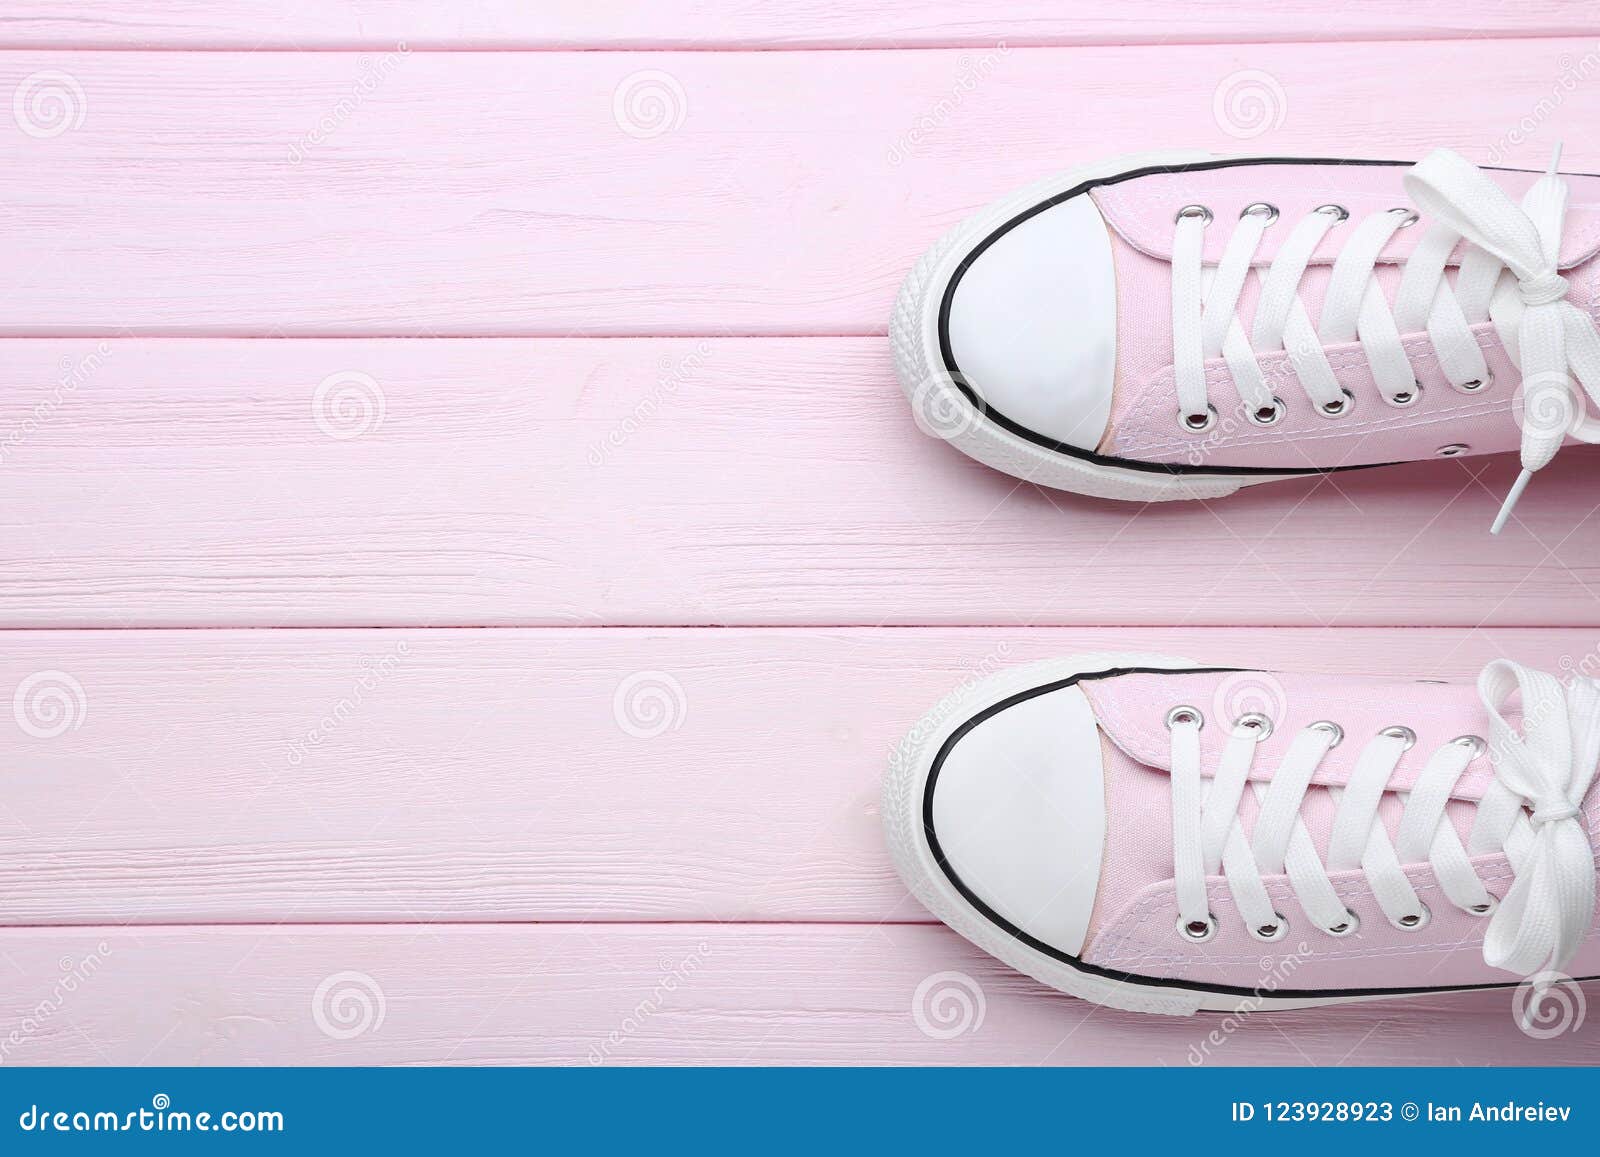 Pair of sneakers stock image. Image of classic, pink - 123928923